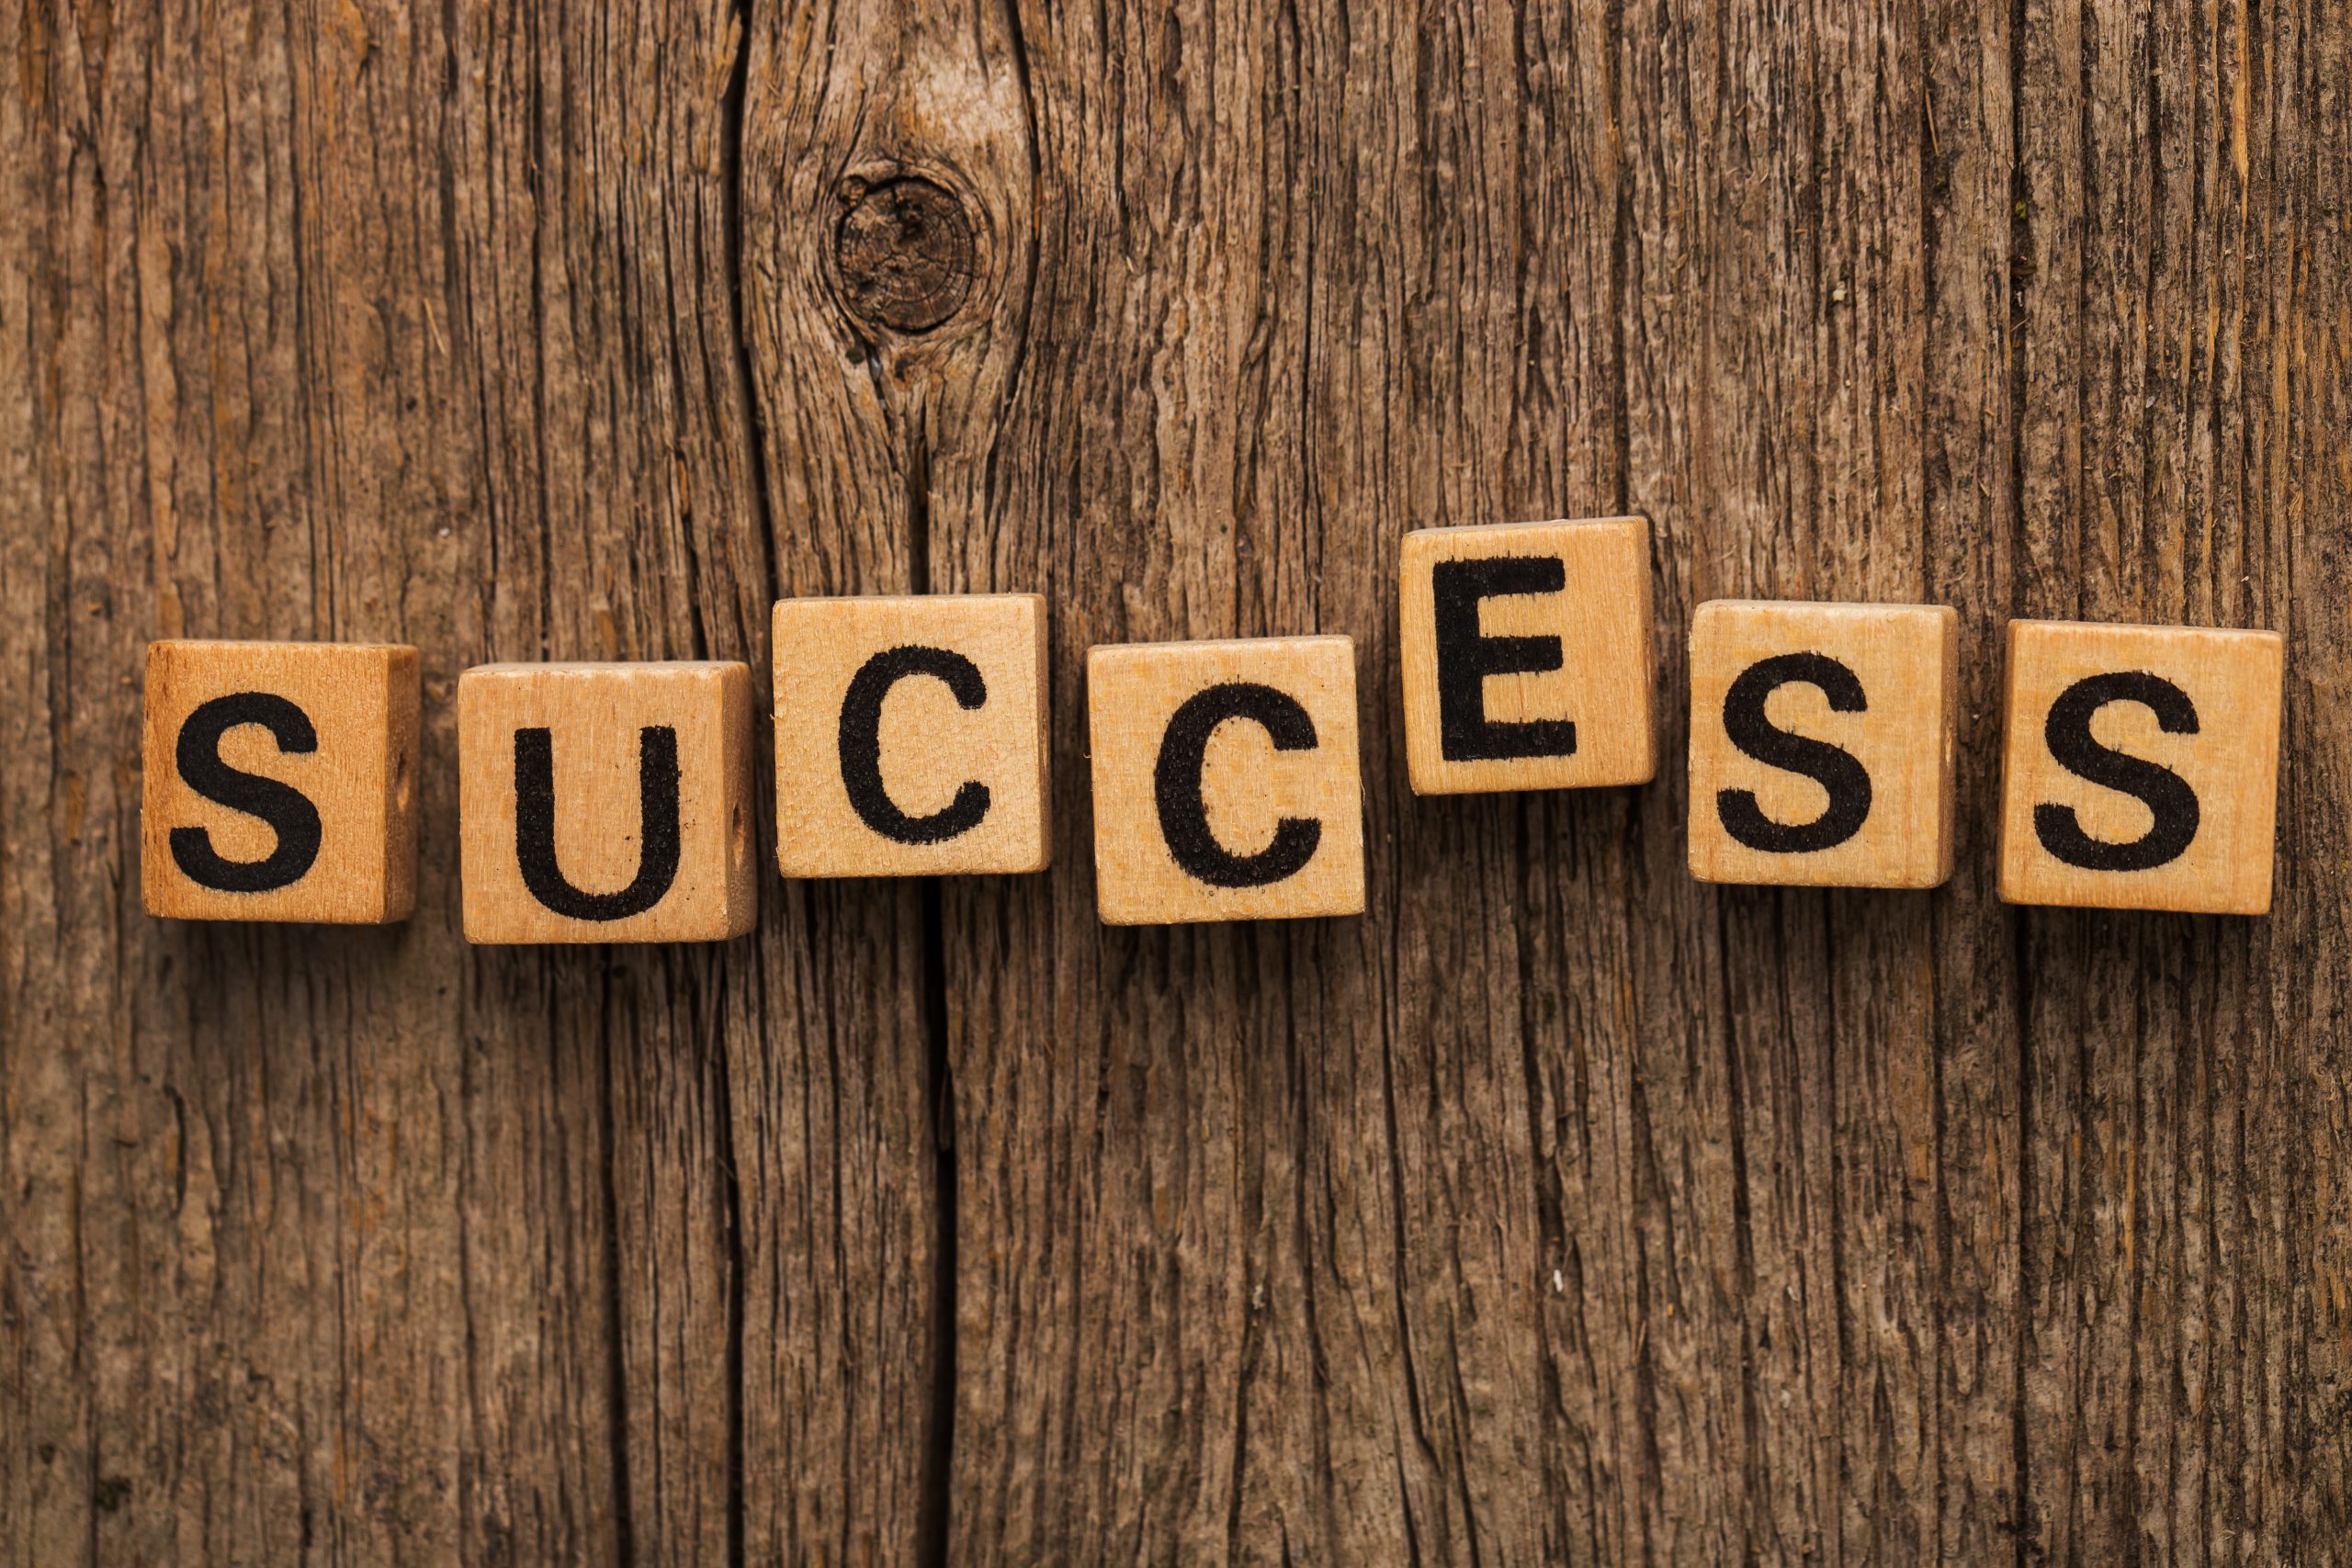 Success is spelled with toy bricks on the wooden table